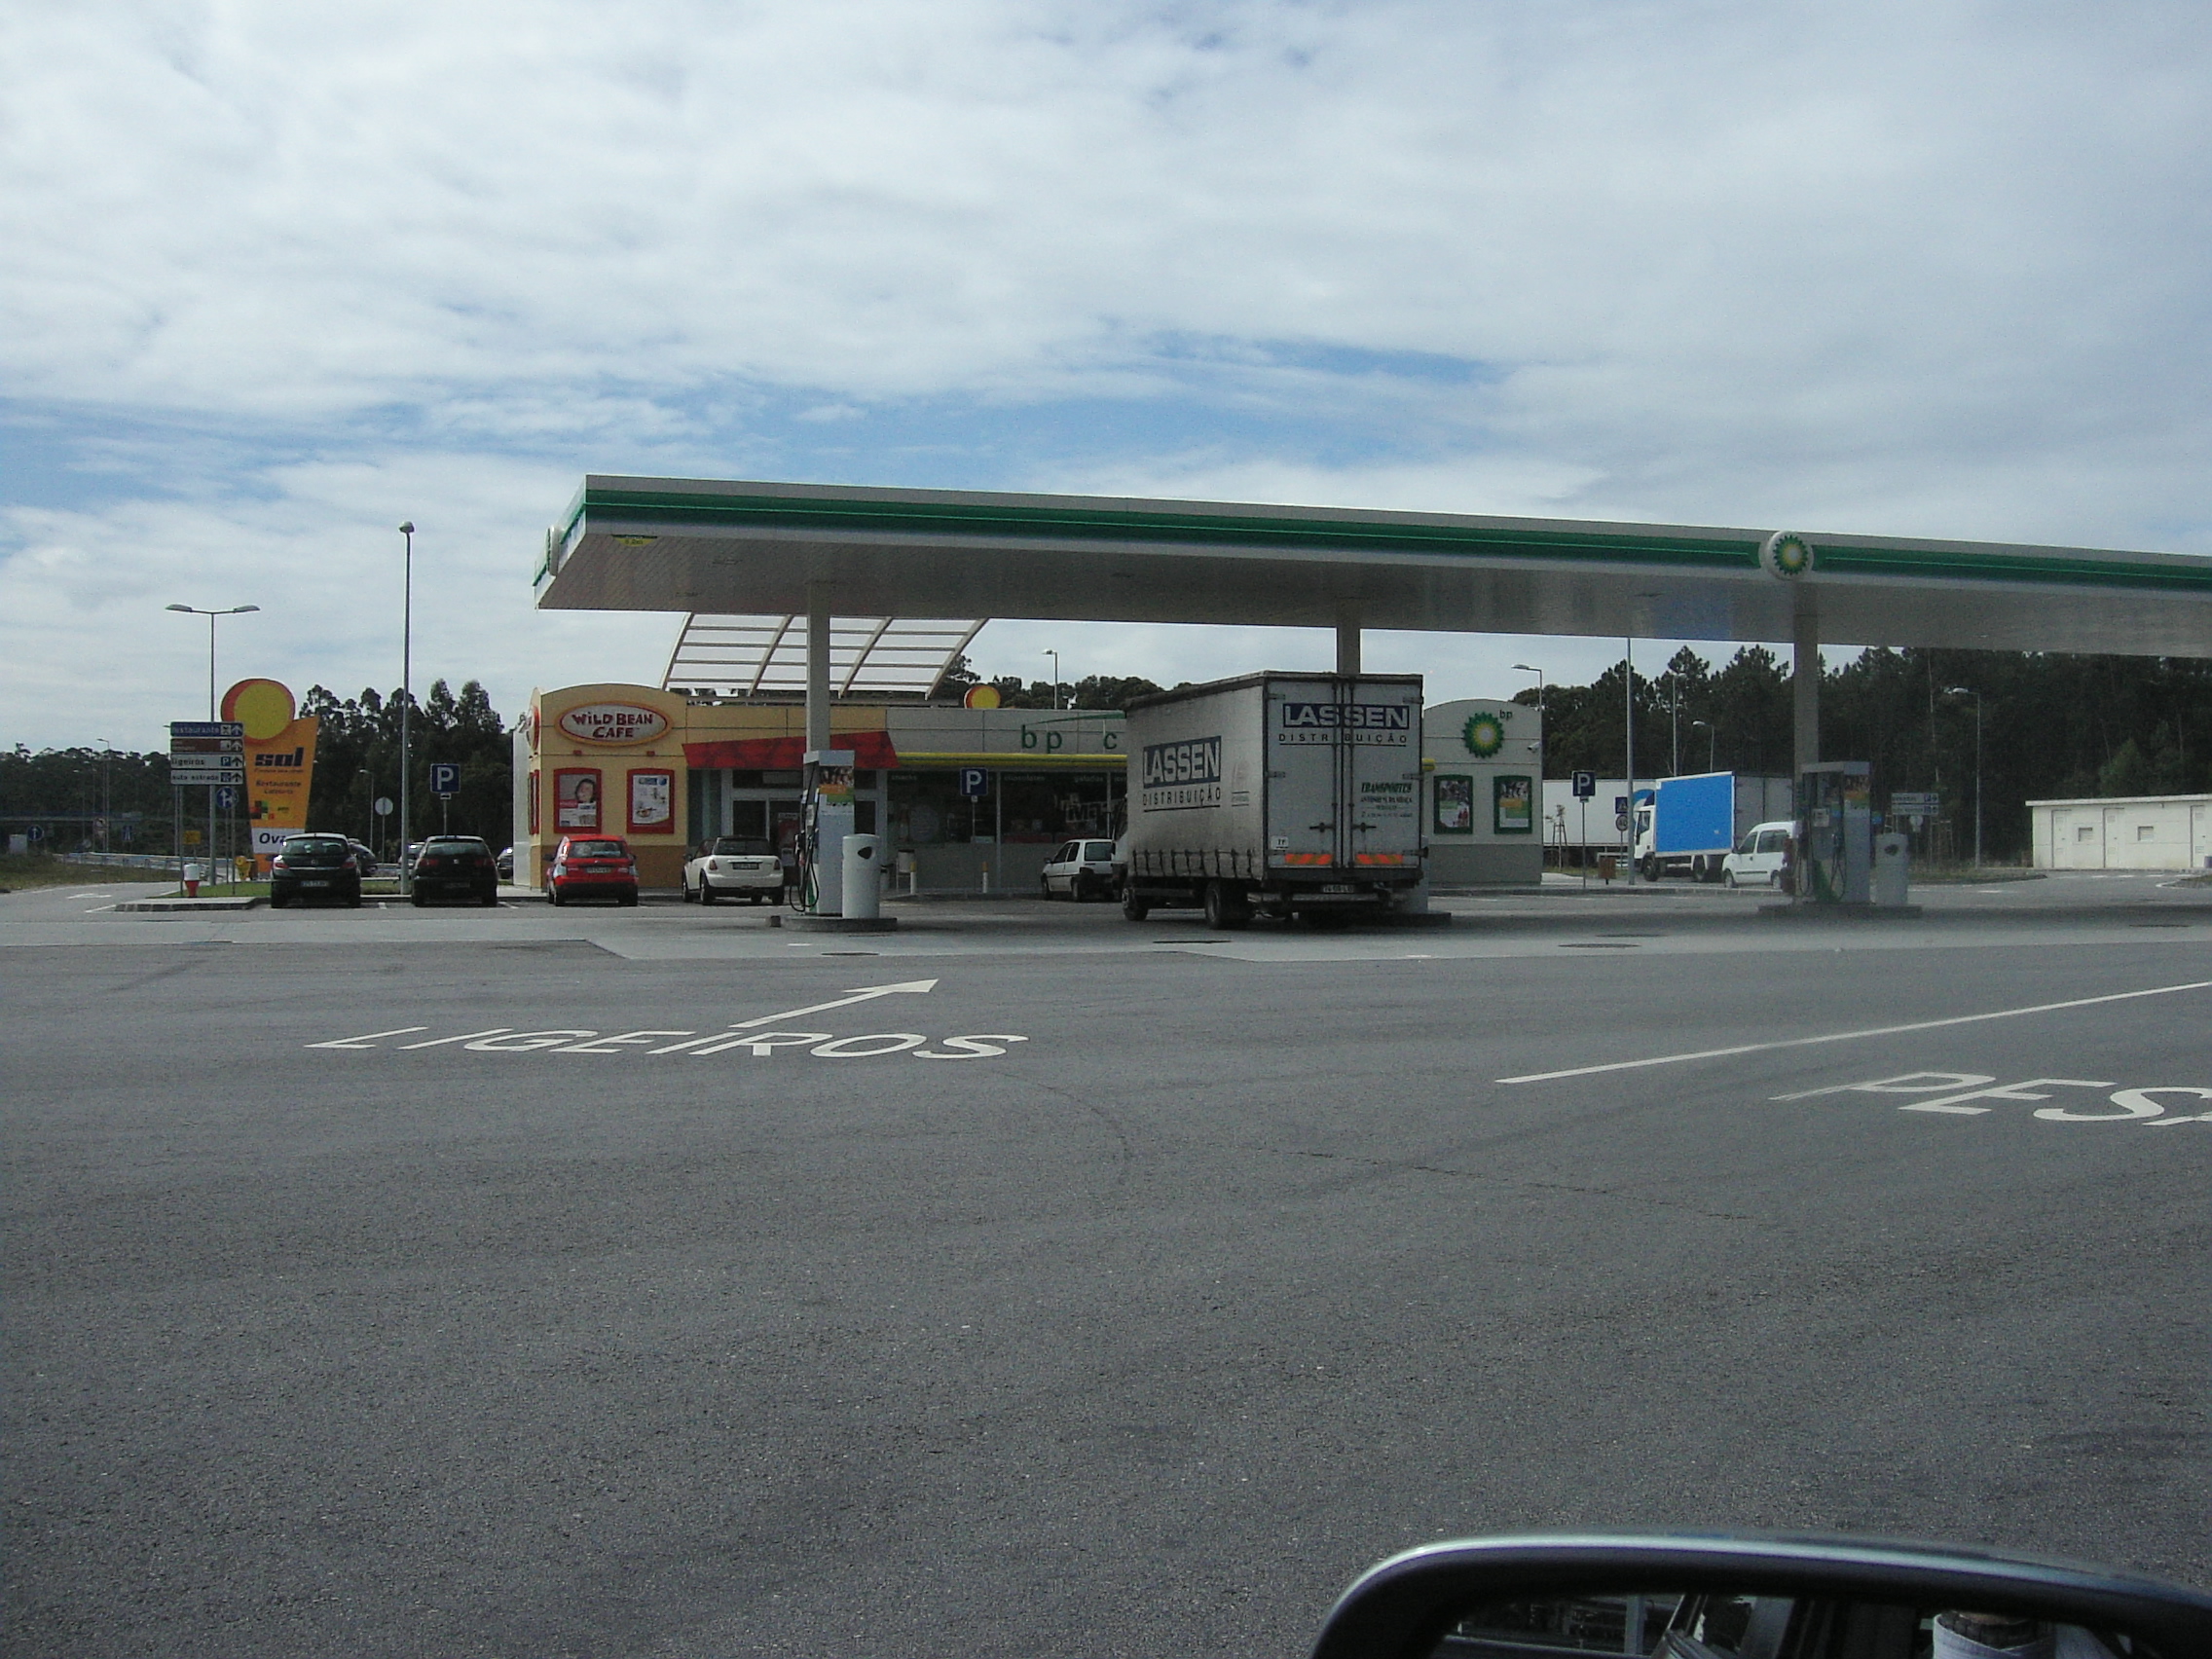 Petrol stations in Europe